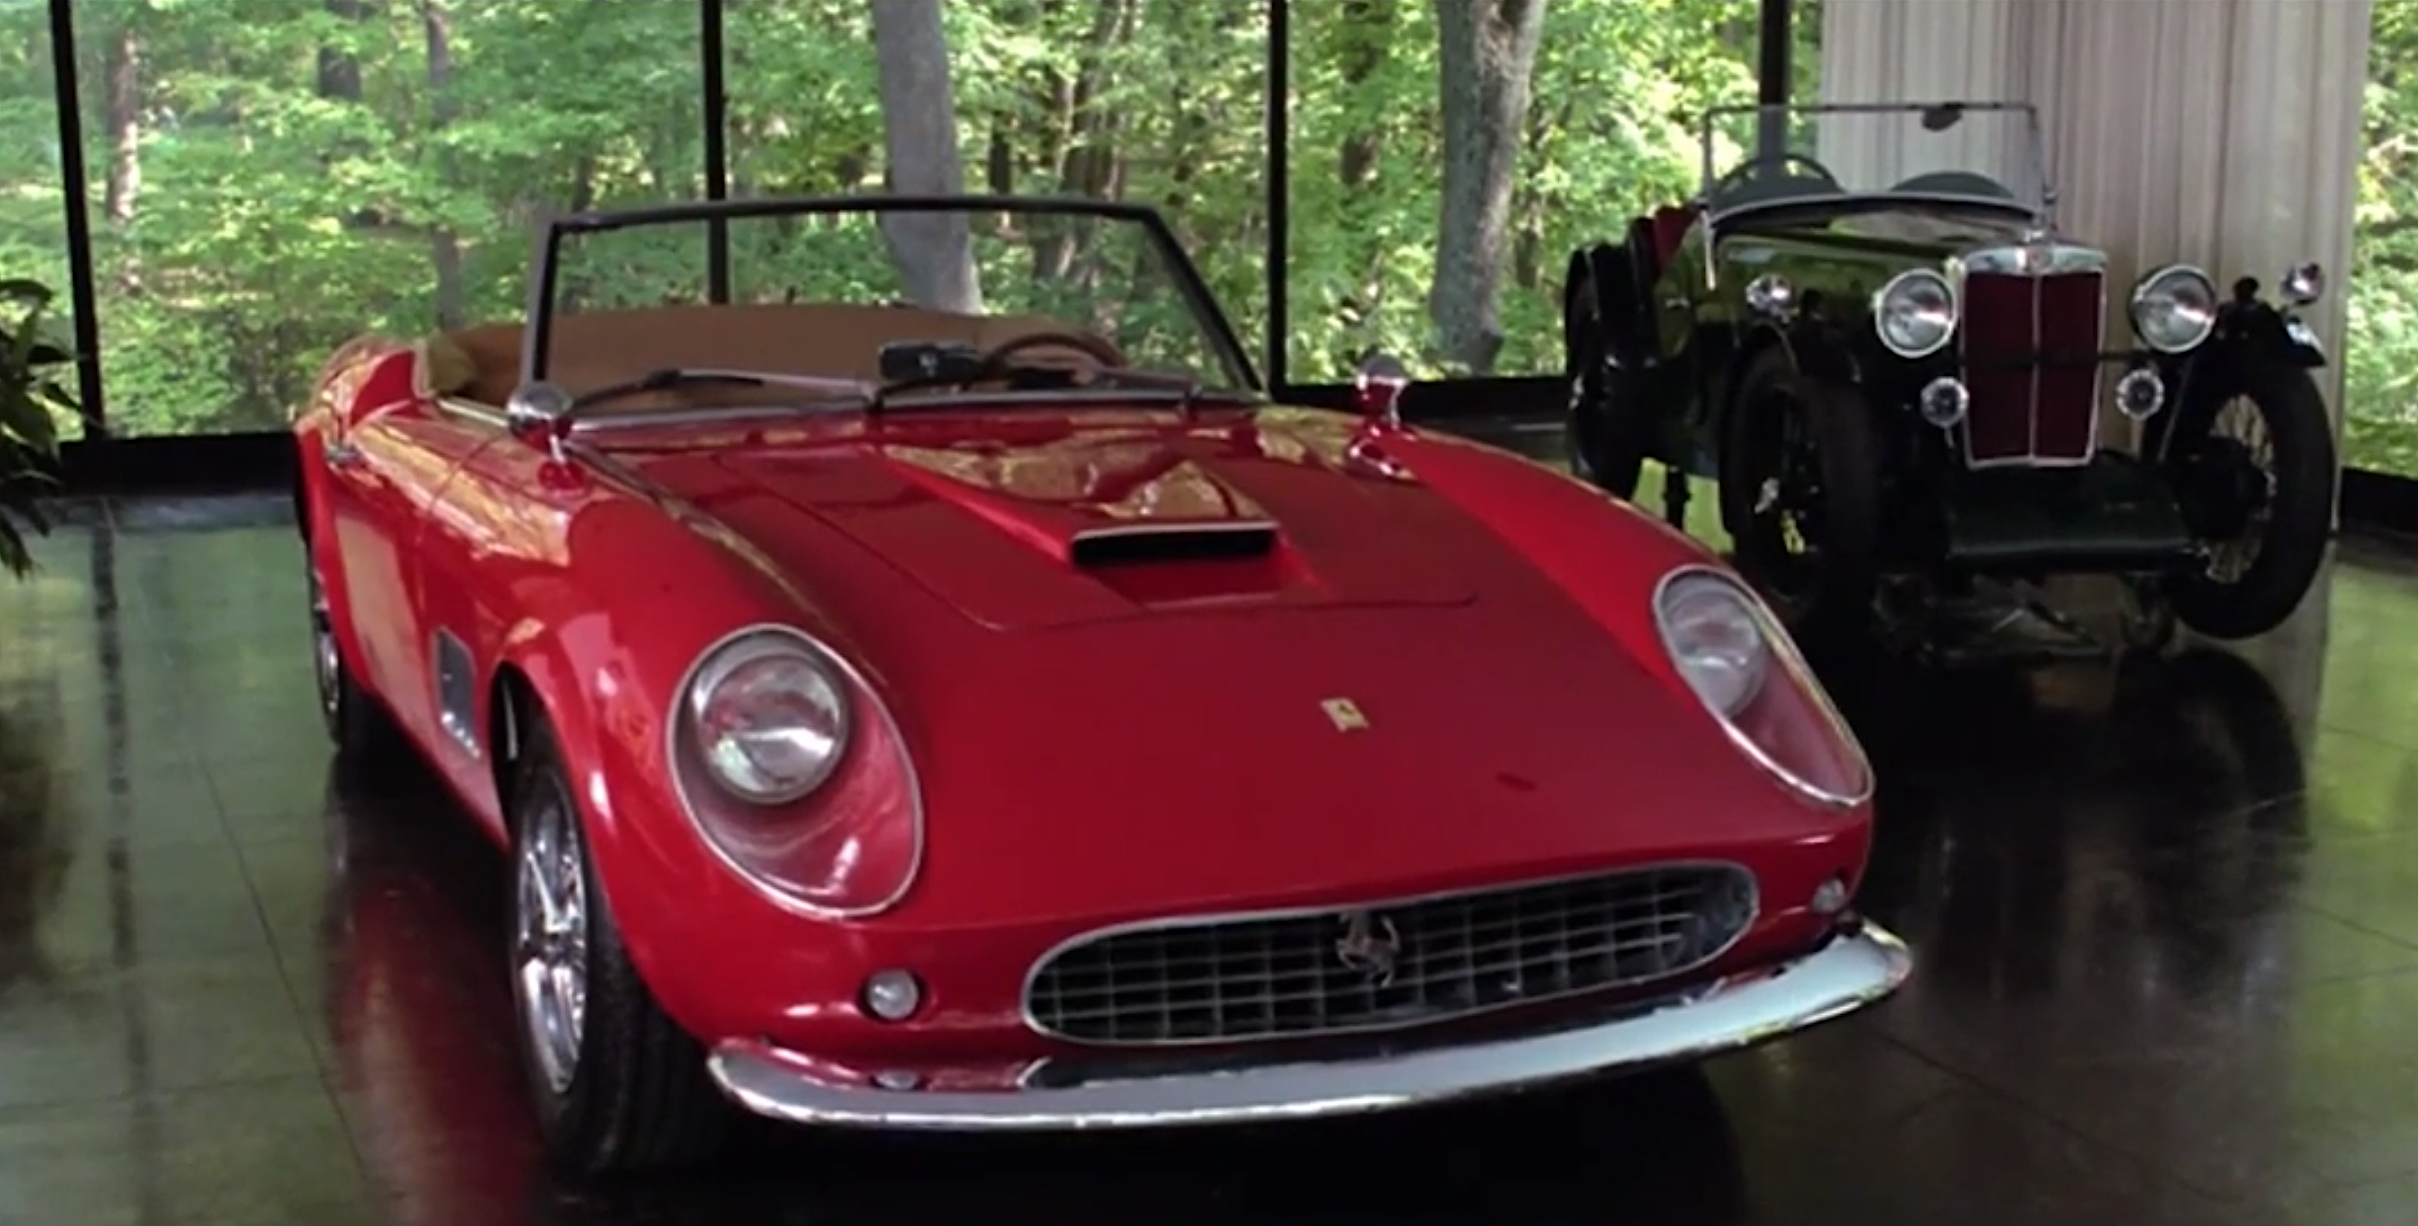 The Ferrari Replica From Ferris Buellers Day Off Is Heading